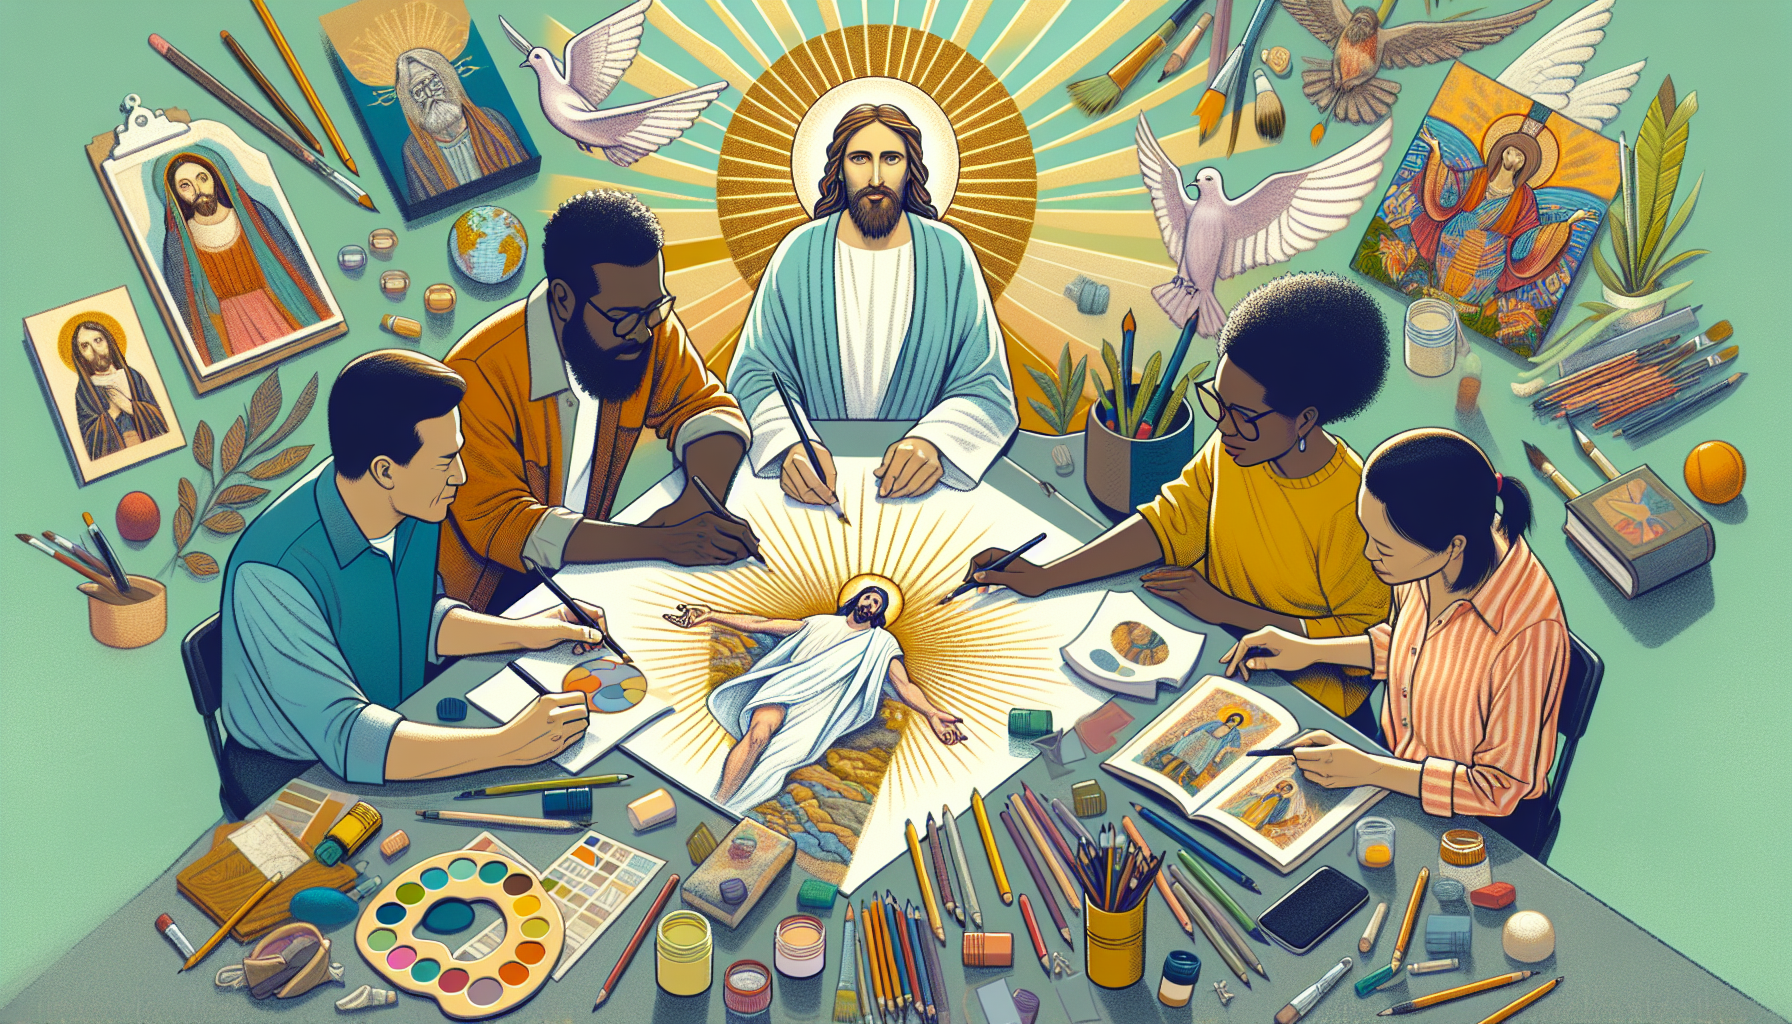 Create an illustration showing a diverse group of people from different cultures and backgrounds drawing a depiction of the resurrected Jesus. Include various art supplies such as pencils, paints, and